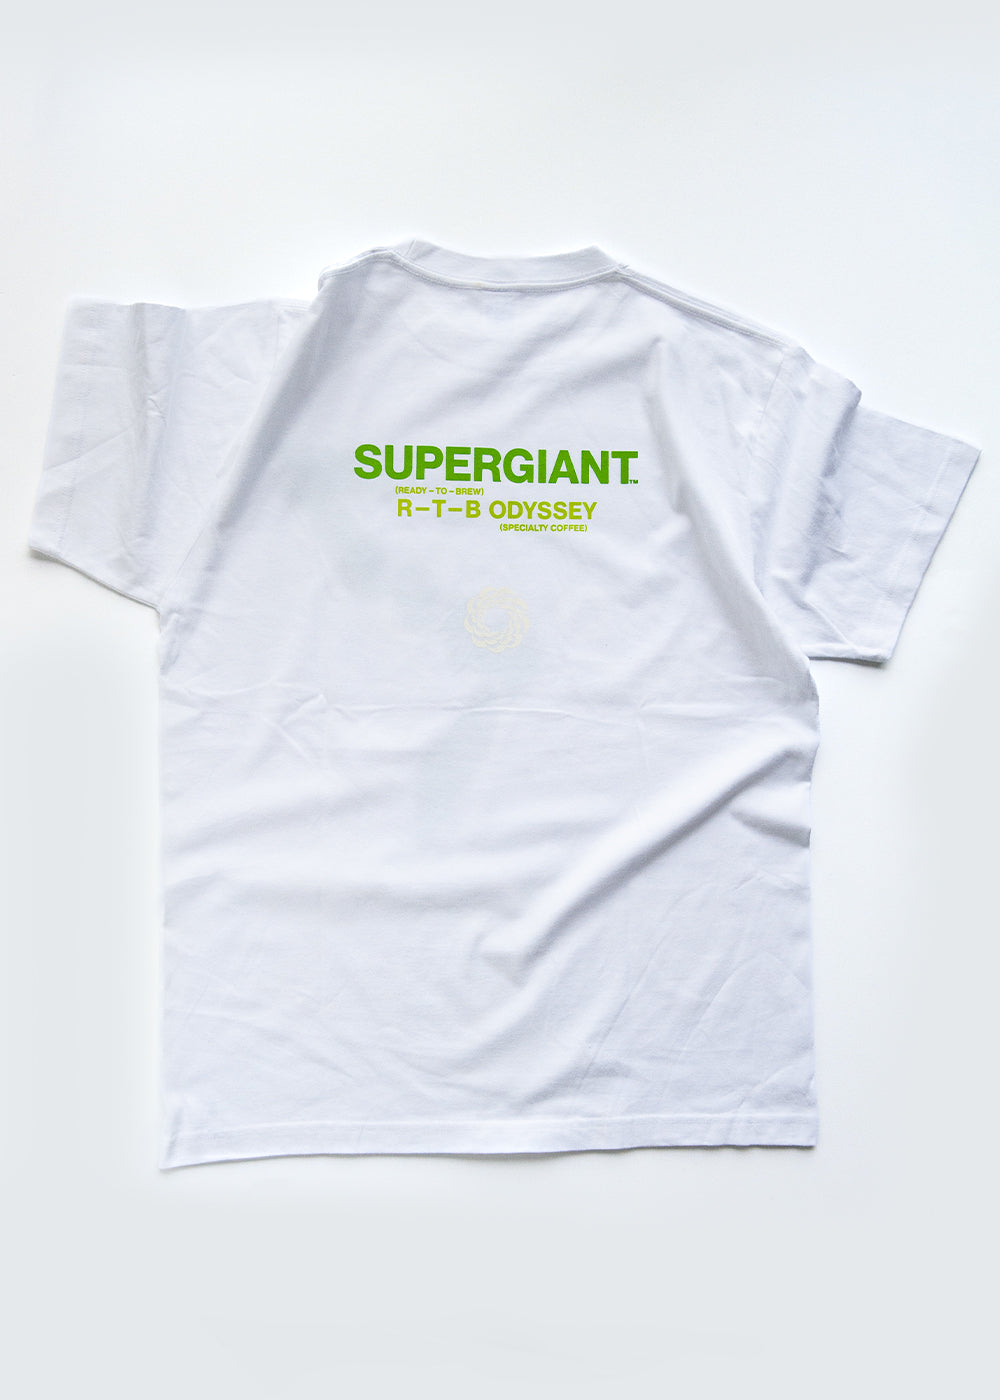 SUPERGIANT™ 2ND ODYSSEY T-SHIRT WHITE